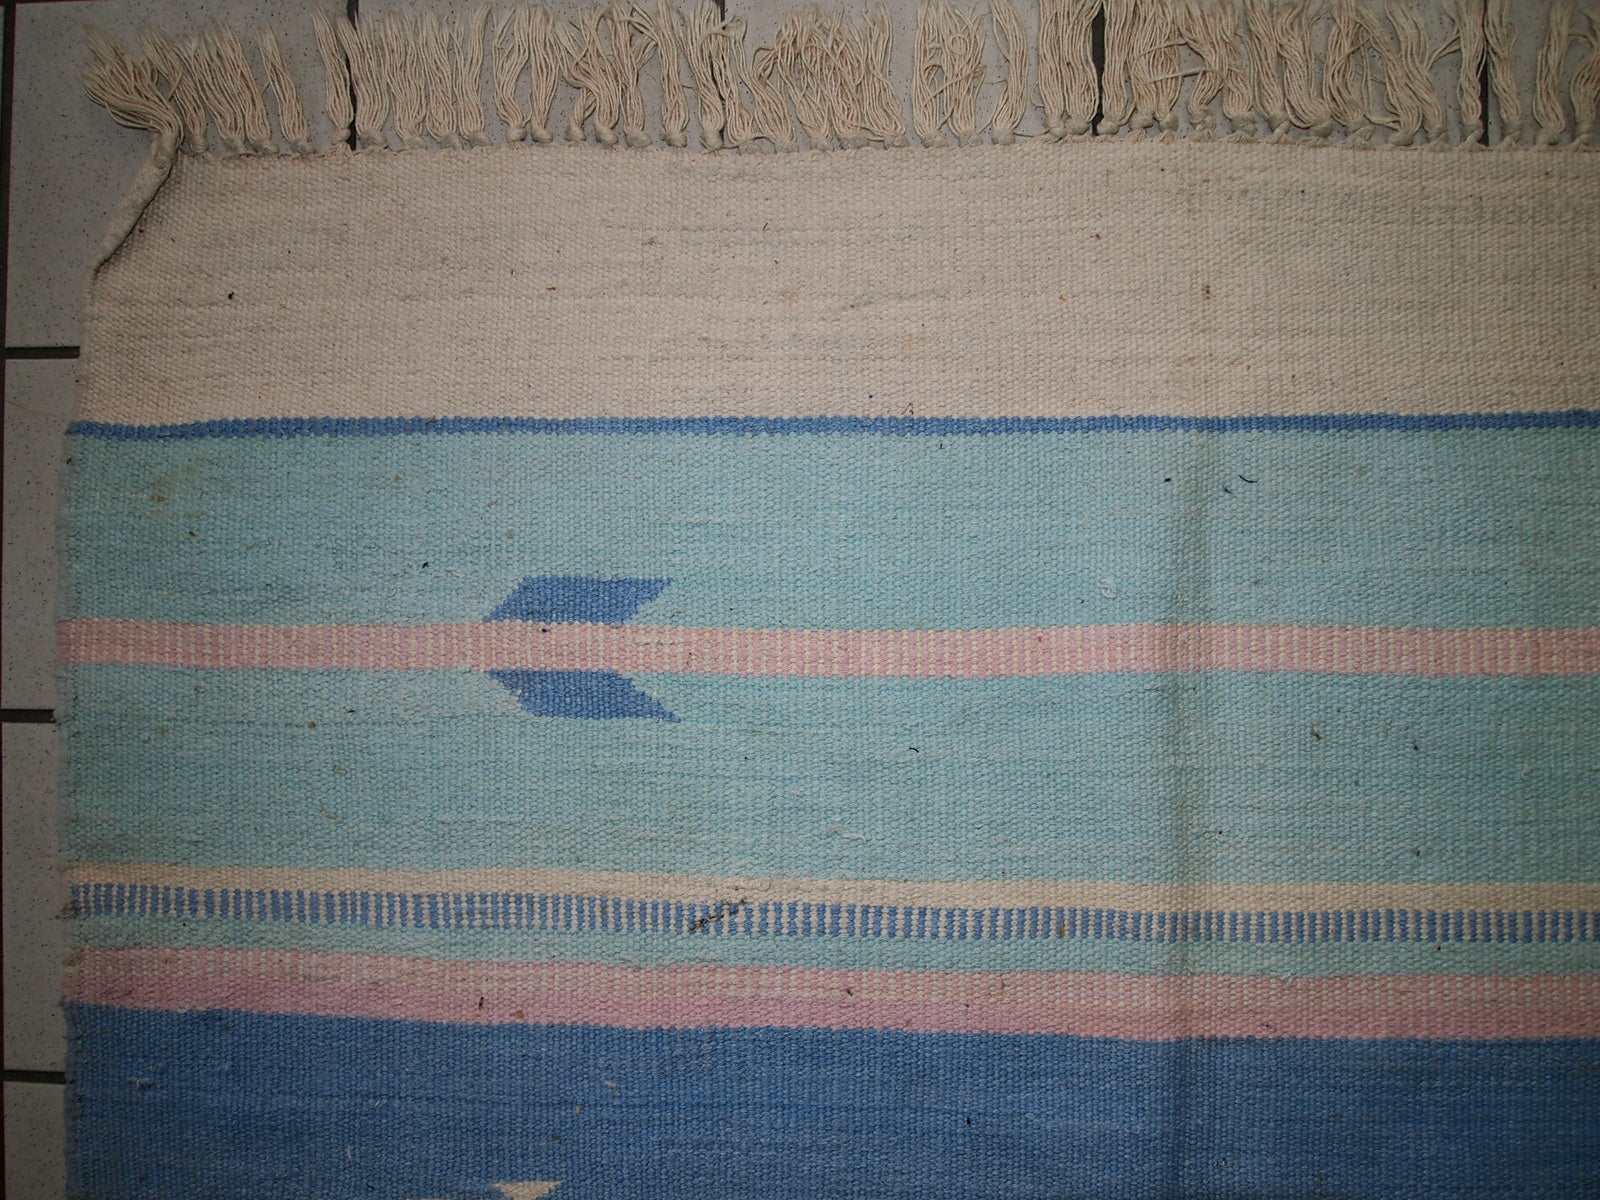 Close-up view of the kilim's tribal pattern with beige and sky blue stripes.